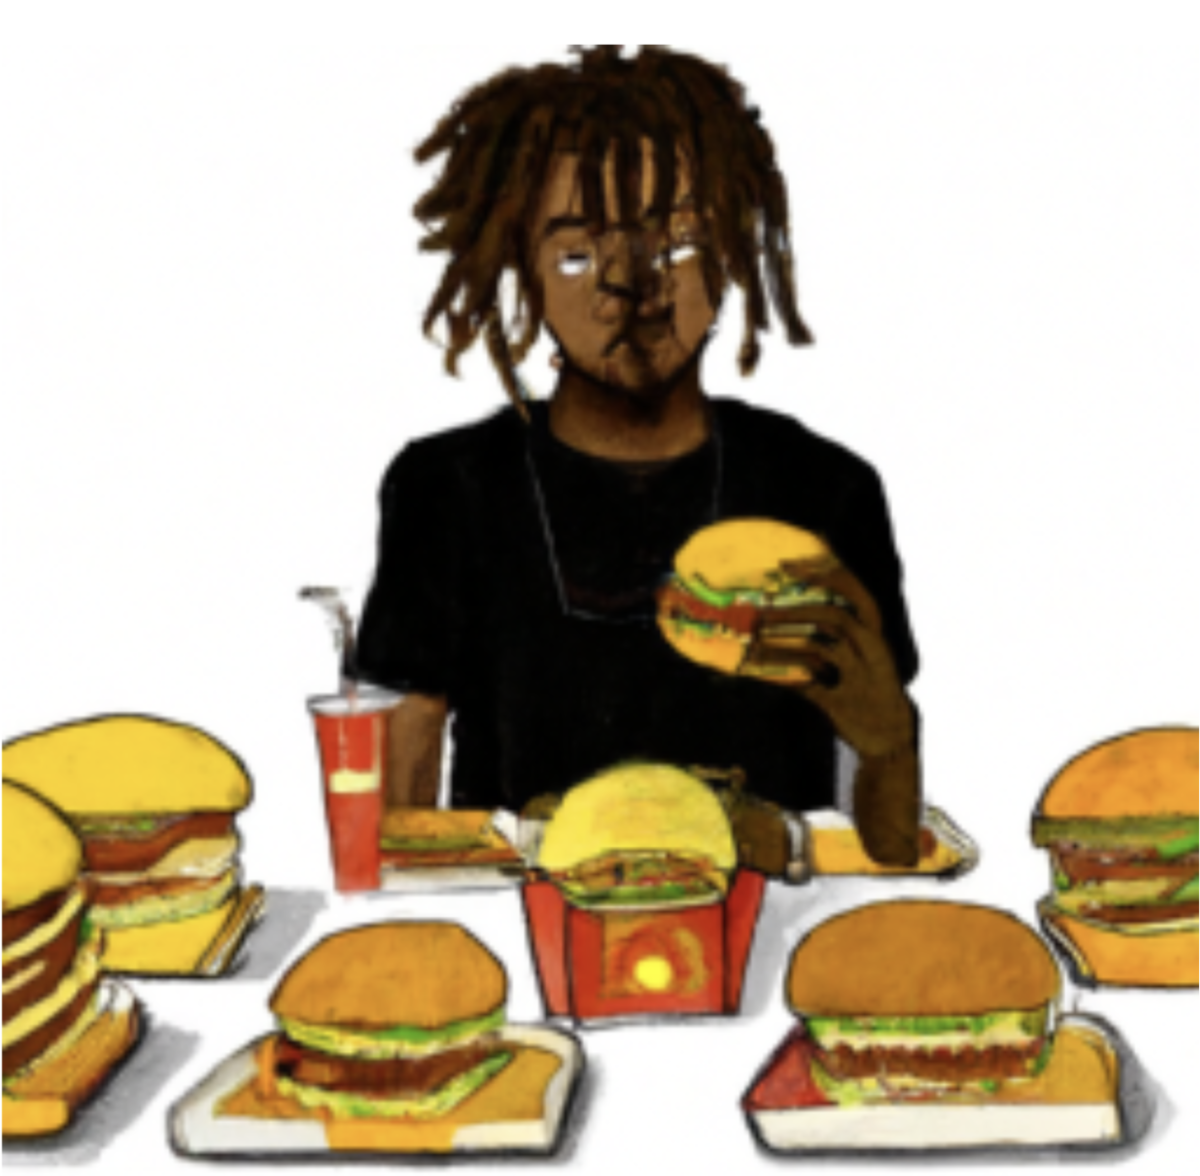 Note. AI generated image using Photoshop from the prompt black boy with dreads eats McDonalds